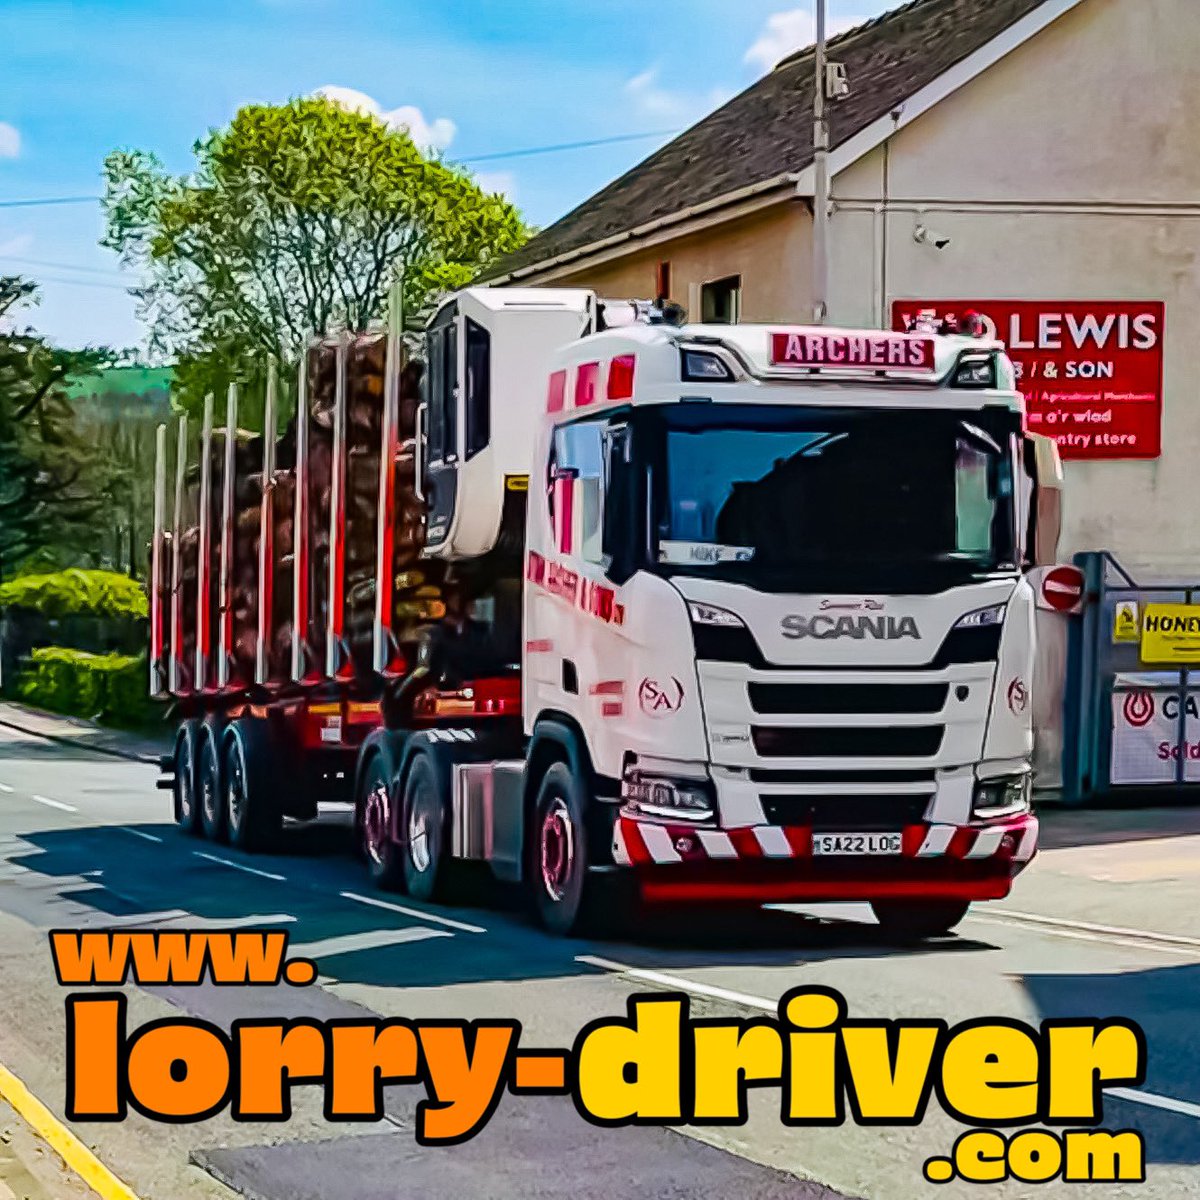 Tomorrow mornings in person course is full, space on the online 2pm Saturday and space on the 10am online and in person Sunday Driver CPC. lorry-driver.com #DriverCPC #DriverTraining #Lorry #Truck #Transport #Logistics #Haulage #Coach #Bus #Travel #LorryDriver #TruckDriver